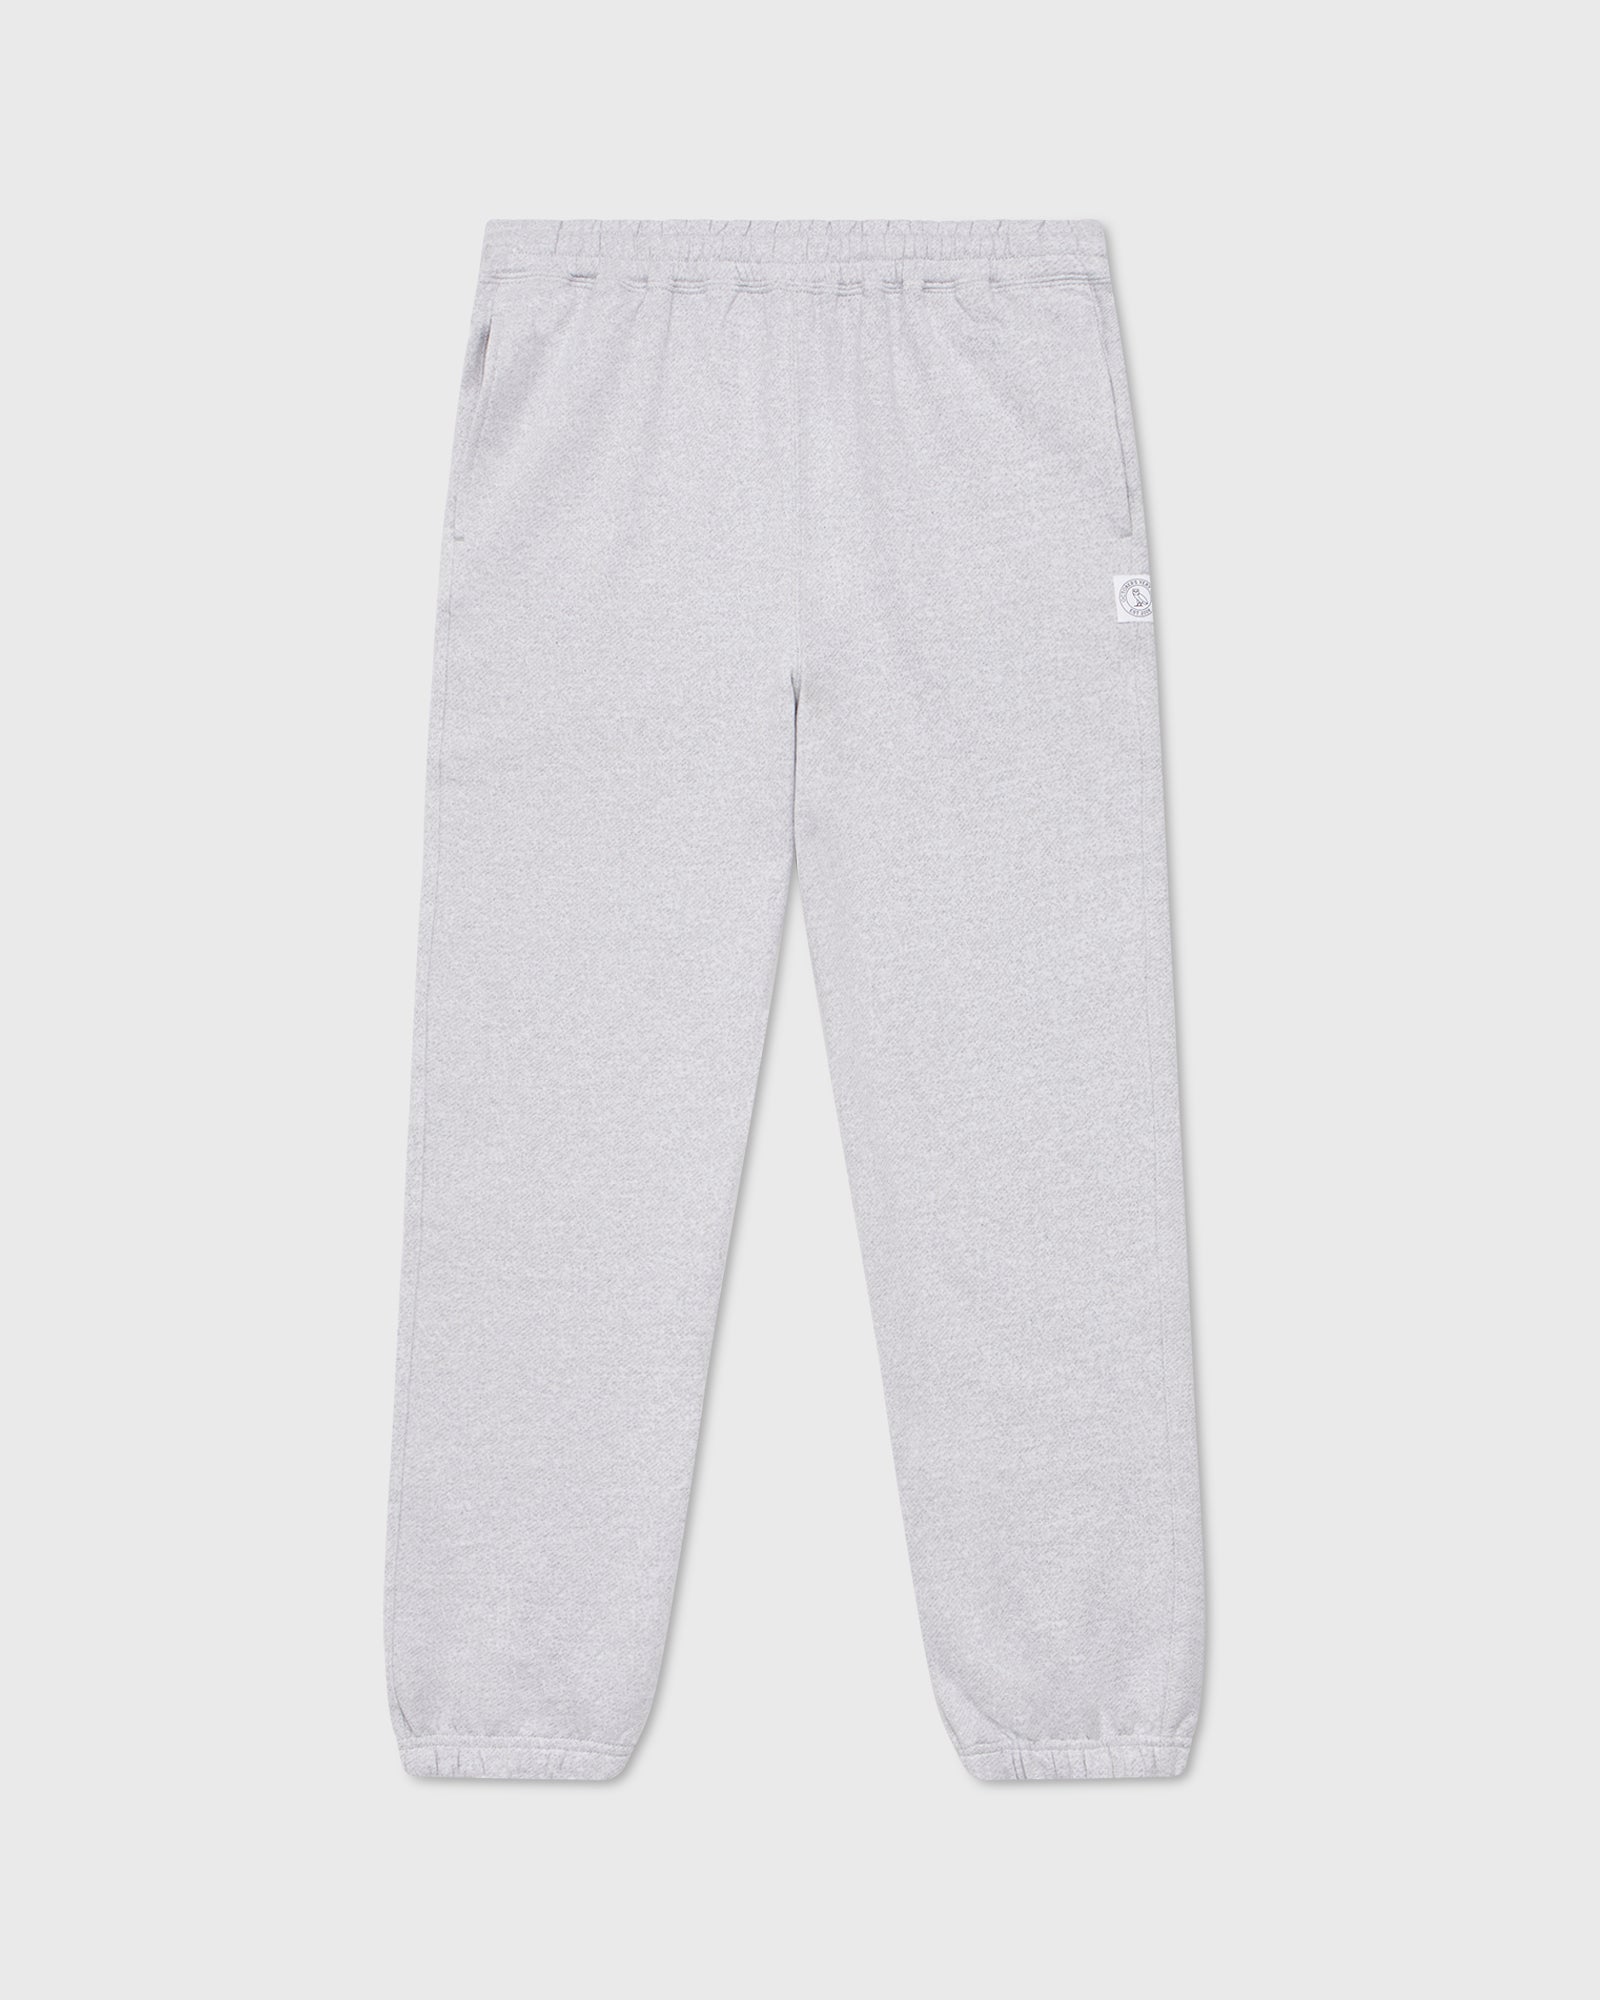 Speckle Fleece Relaxed Fit Sweatpant - Grey IMAGE #1